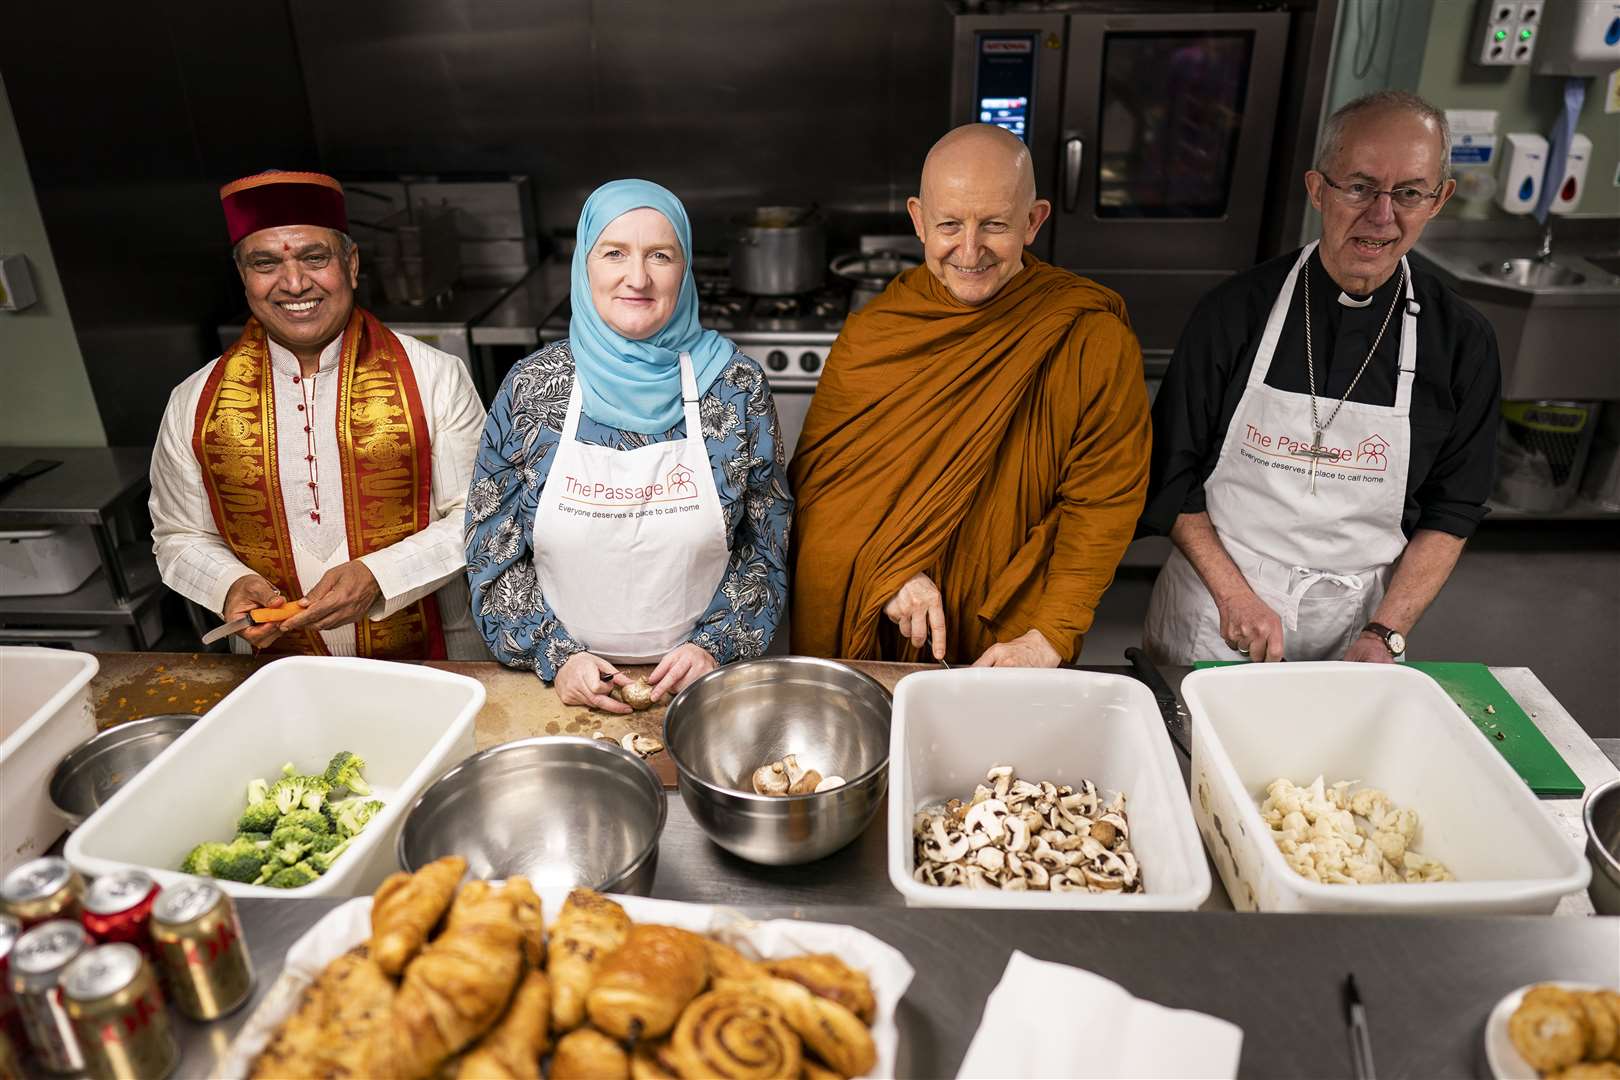 Krishan Kant Attri, Julie Siddiqi, Venerable Ajahn Amaro and the Archbishop of Canterbury Justin Welby taking part in the Big Help Out which aims to inspire a new generation of volunteers (Aaron Chown/PA)